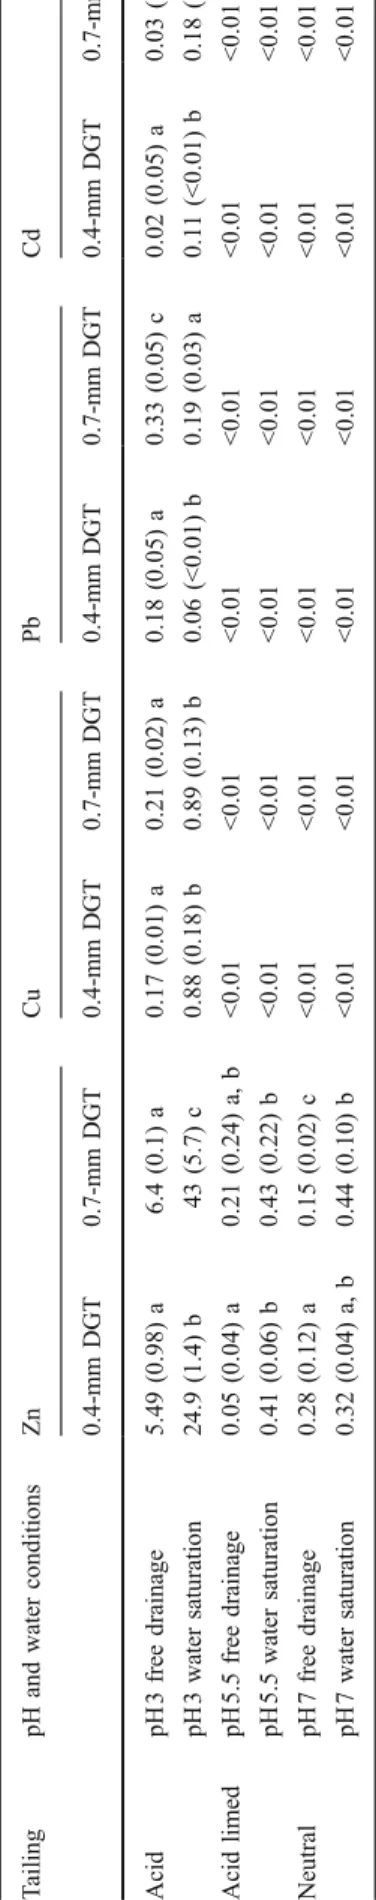 Table 3 shows the ratios C DGT /C soil solution calculated with the data from Tables 1 and 2